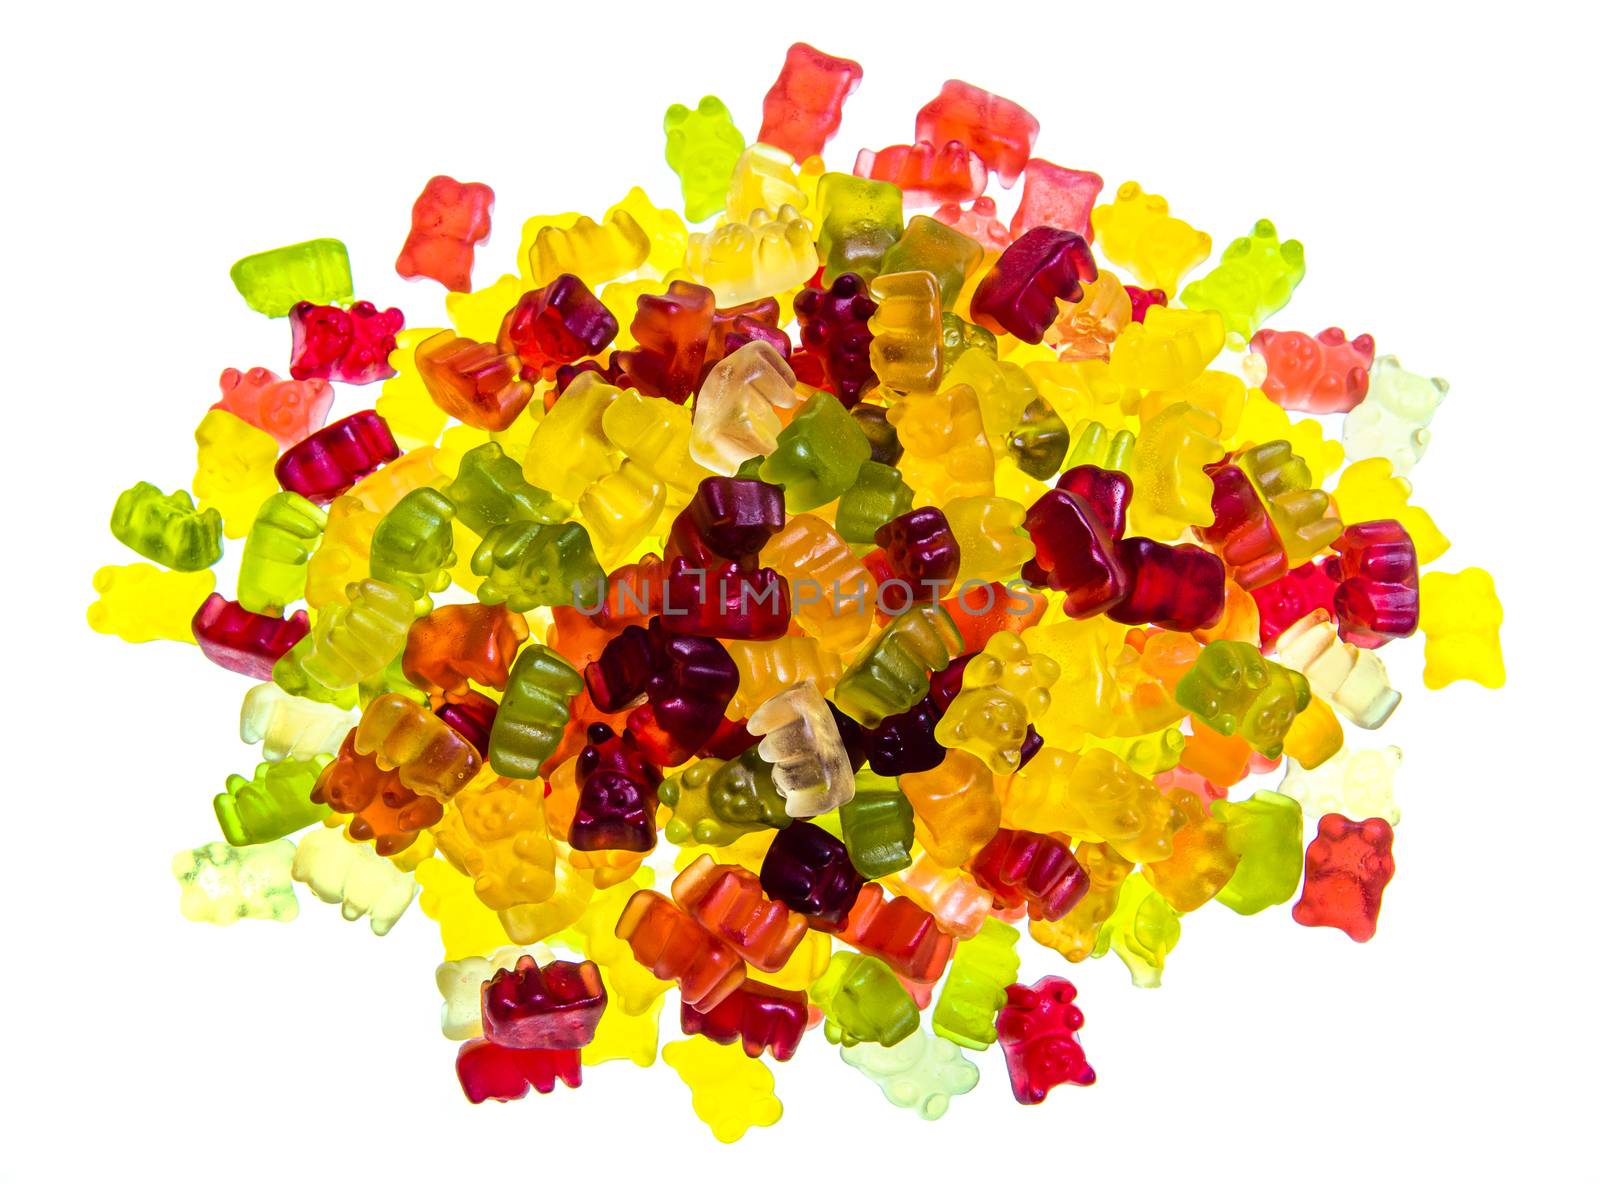 Gummy bears candies isolated on white background by fyletto